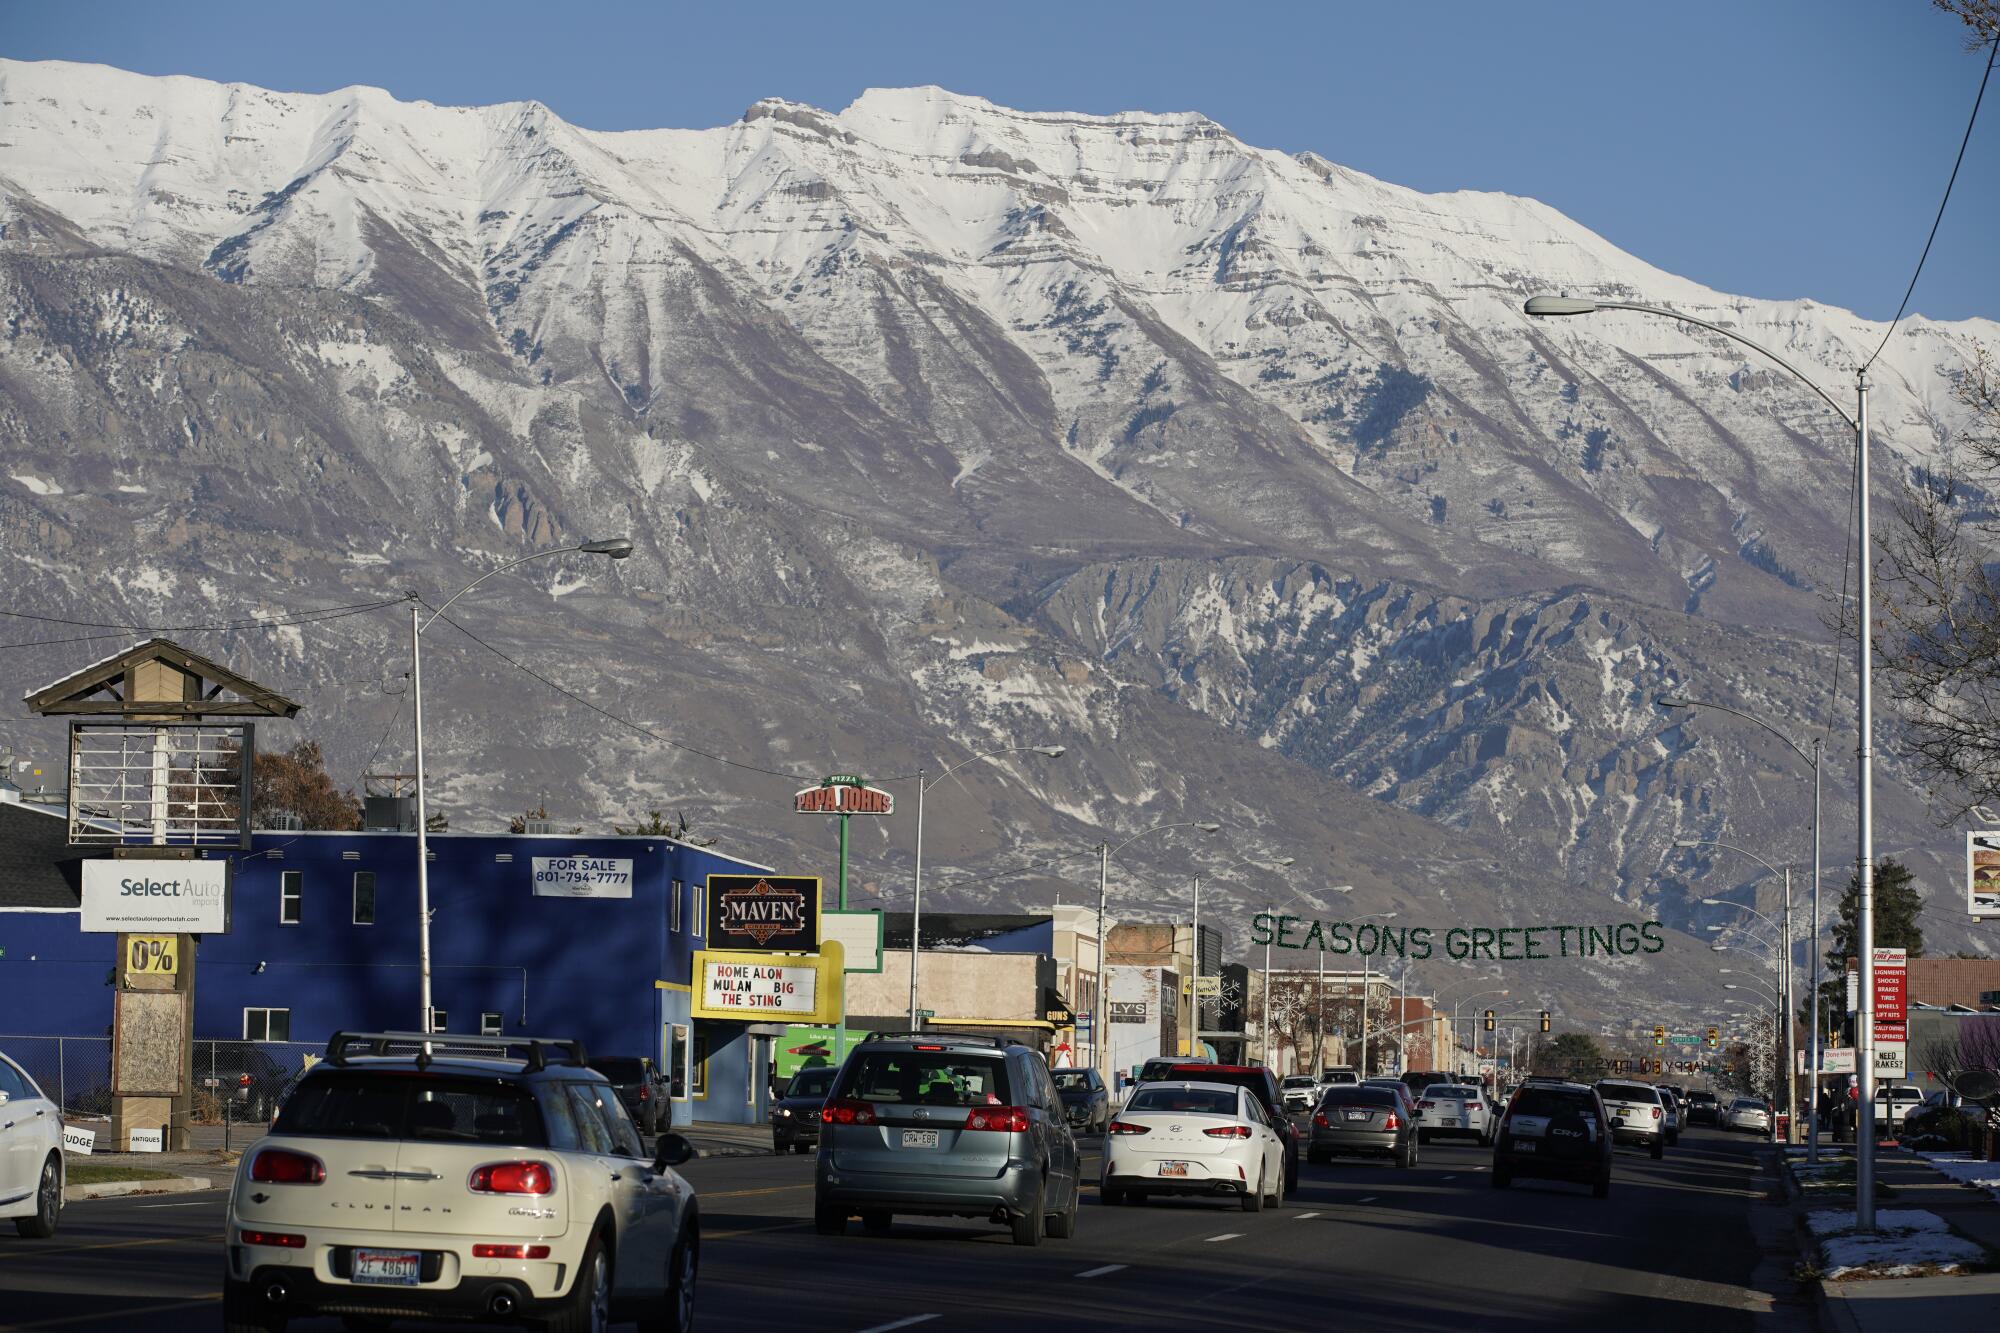 Snow-capped mountains rise over downtown American Fork, Utah.